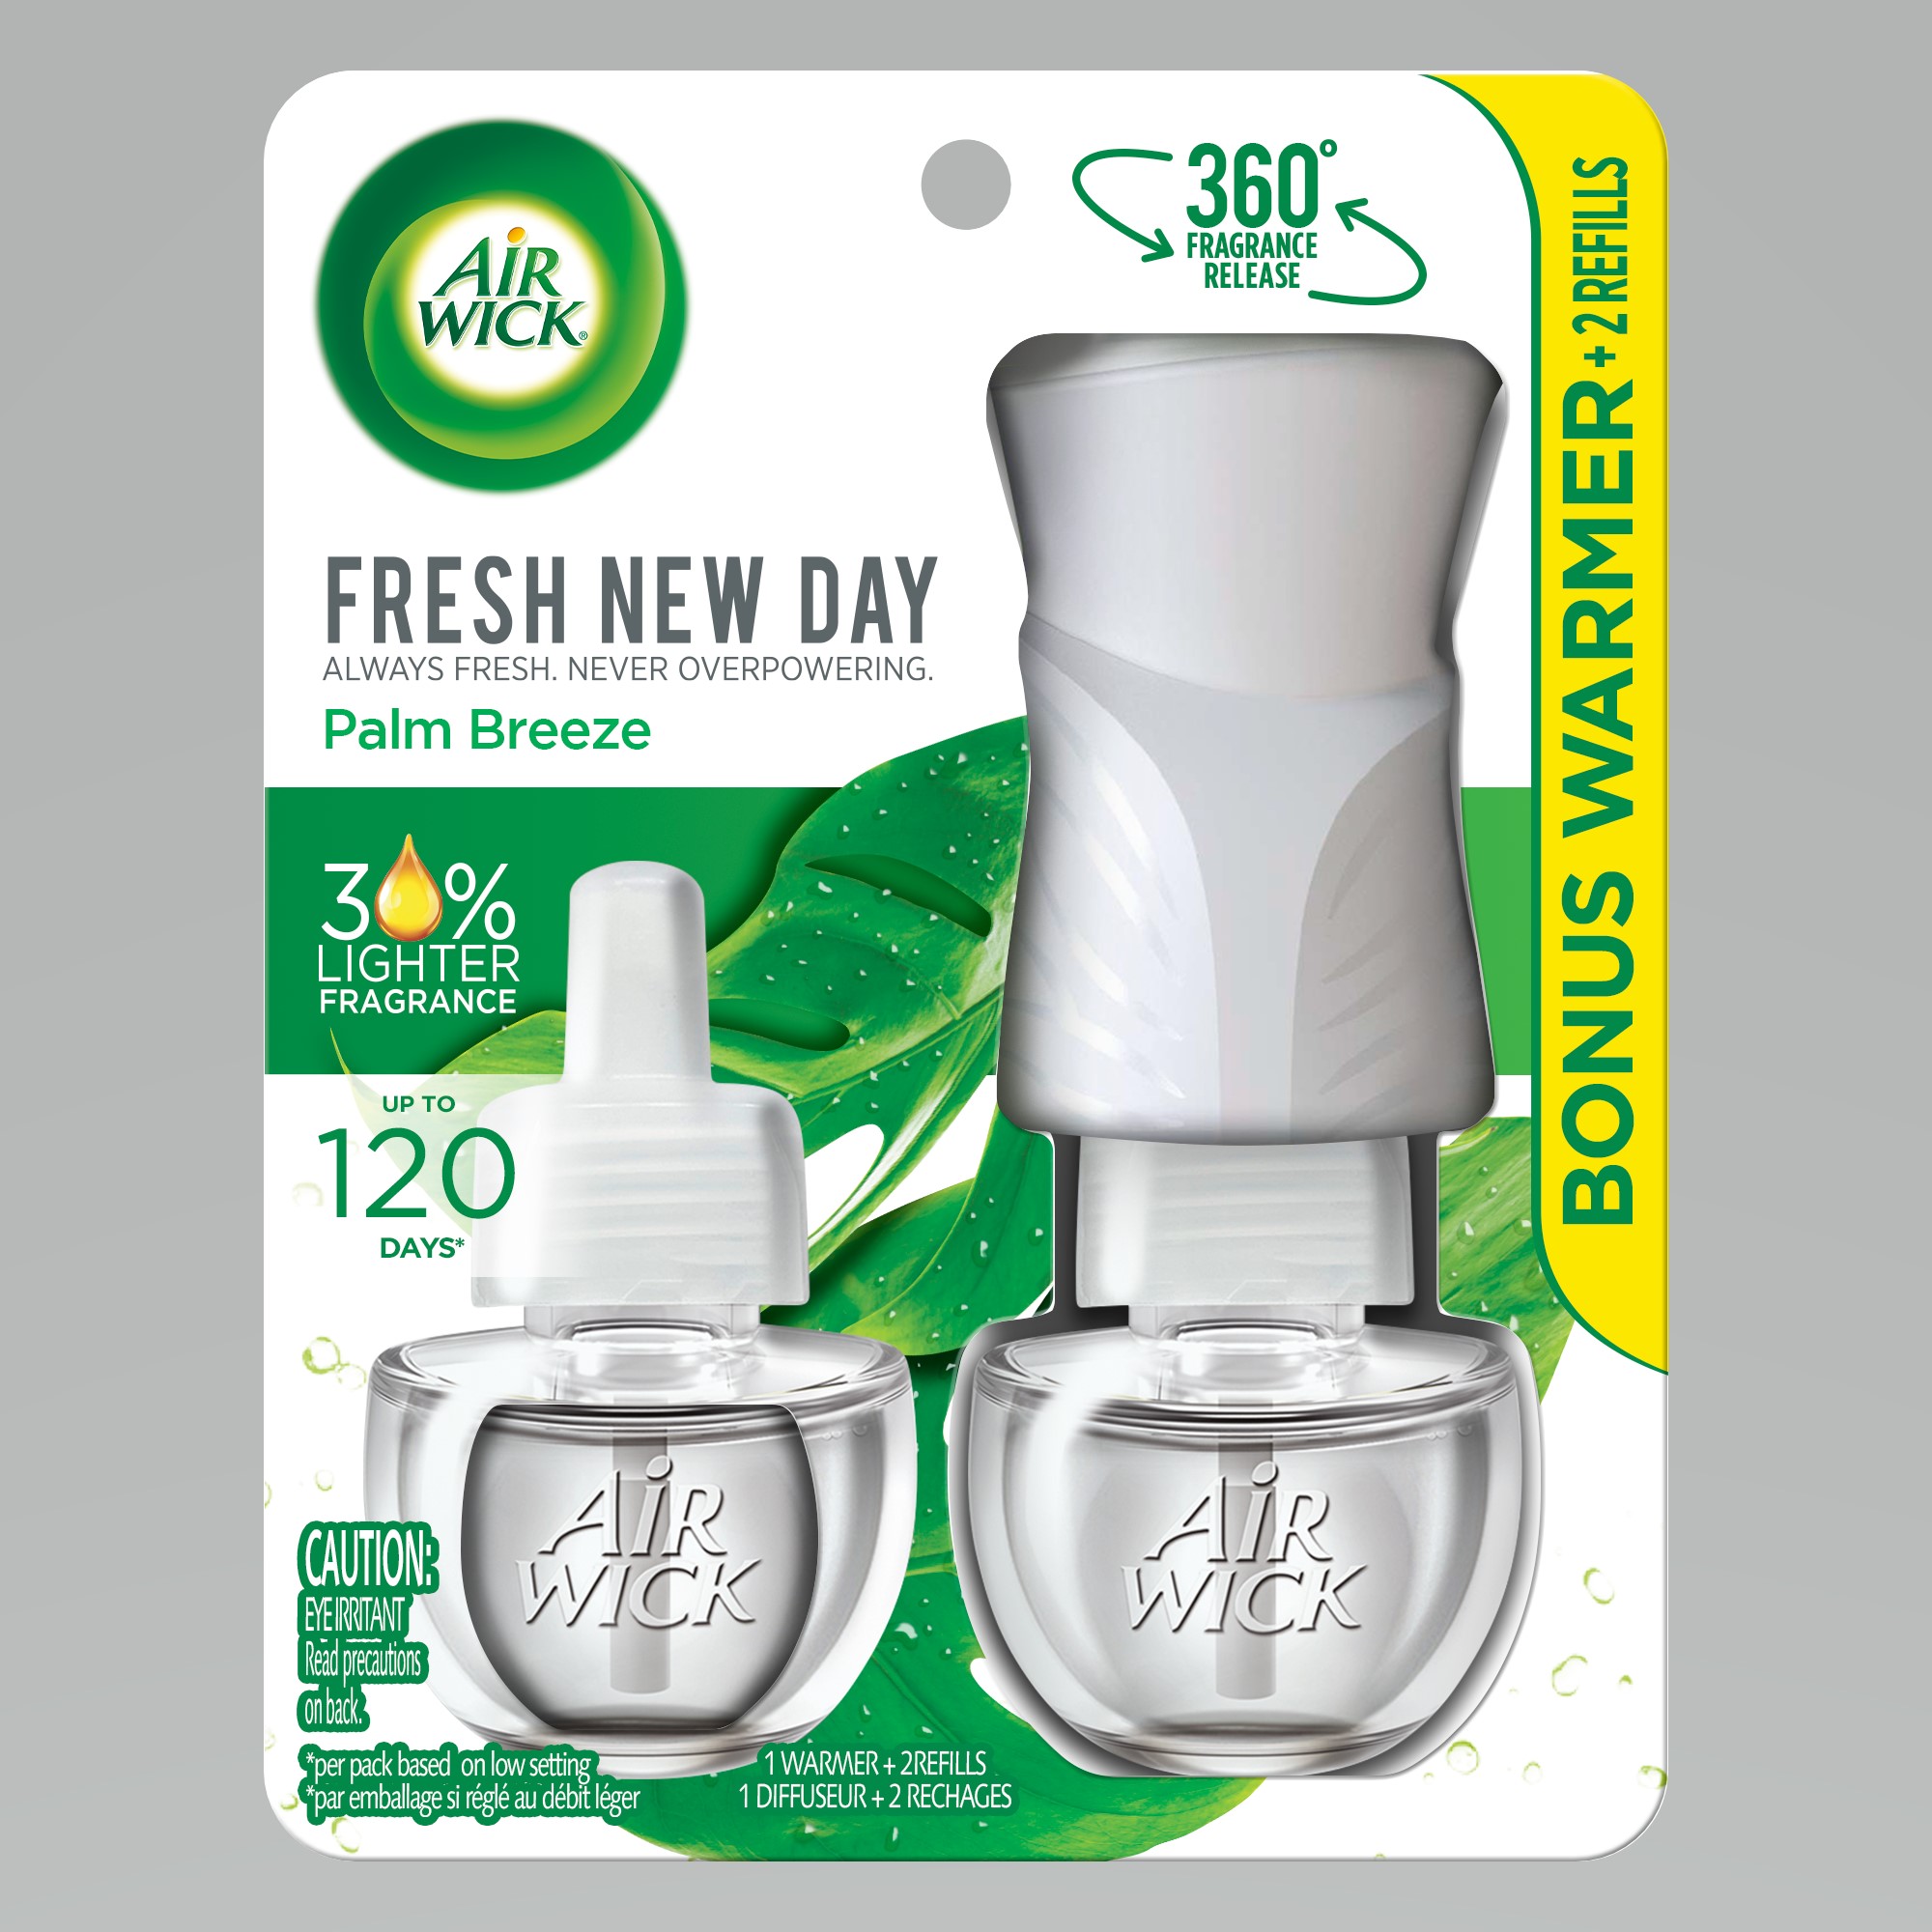 AIR WICK Scented Oil  Palm Breeze  Kit Discontinued